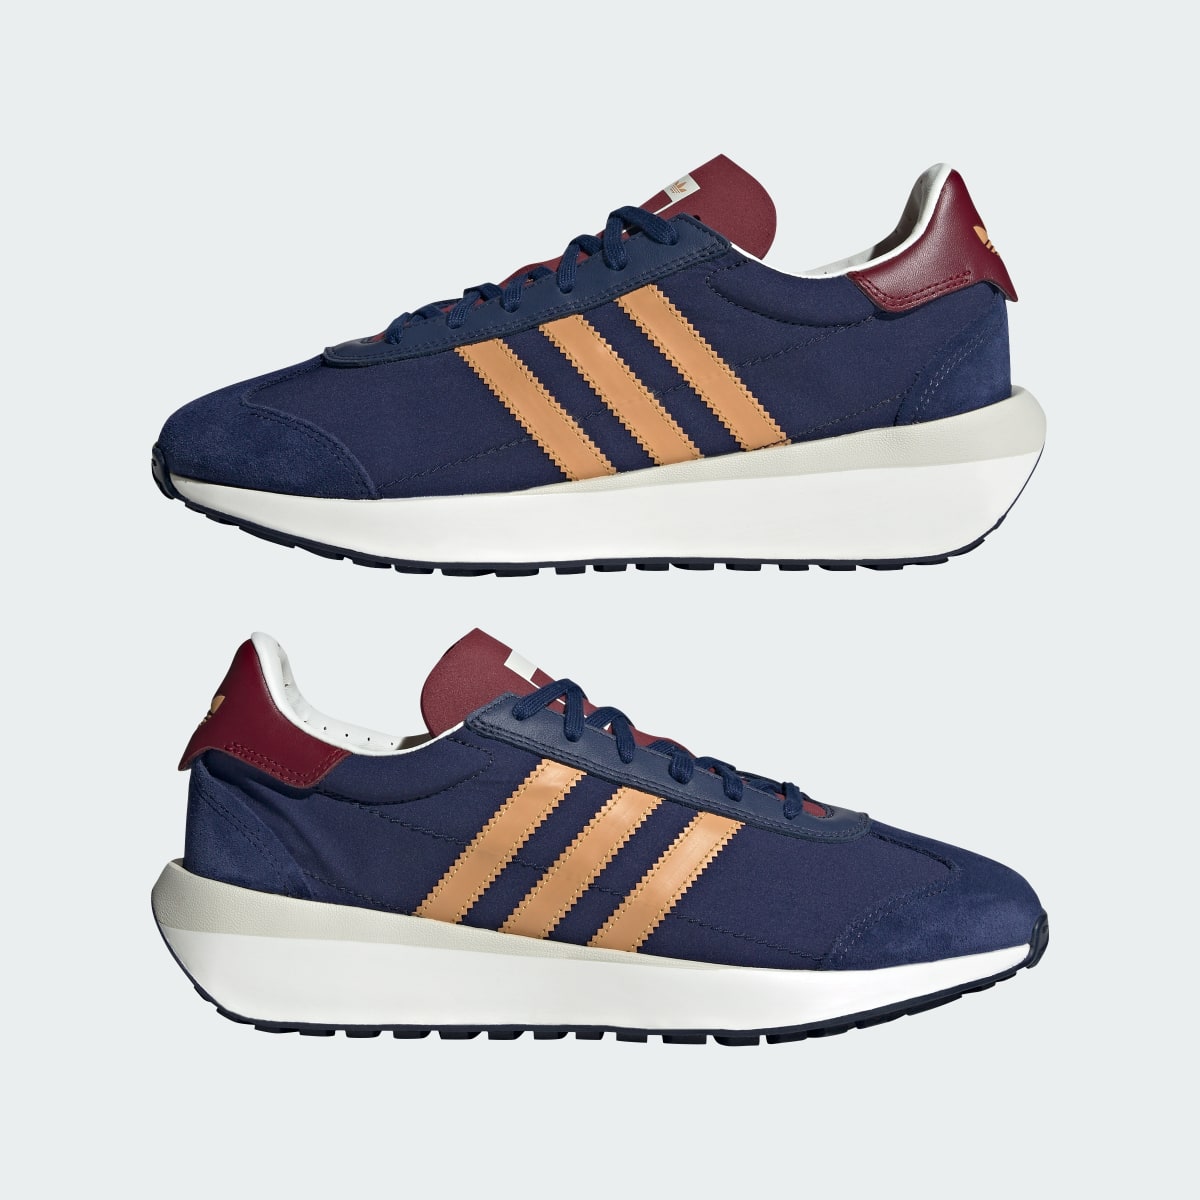 Adidas Chaussure Country XLG. 11